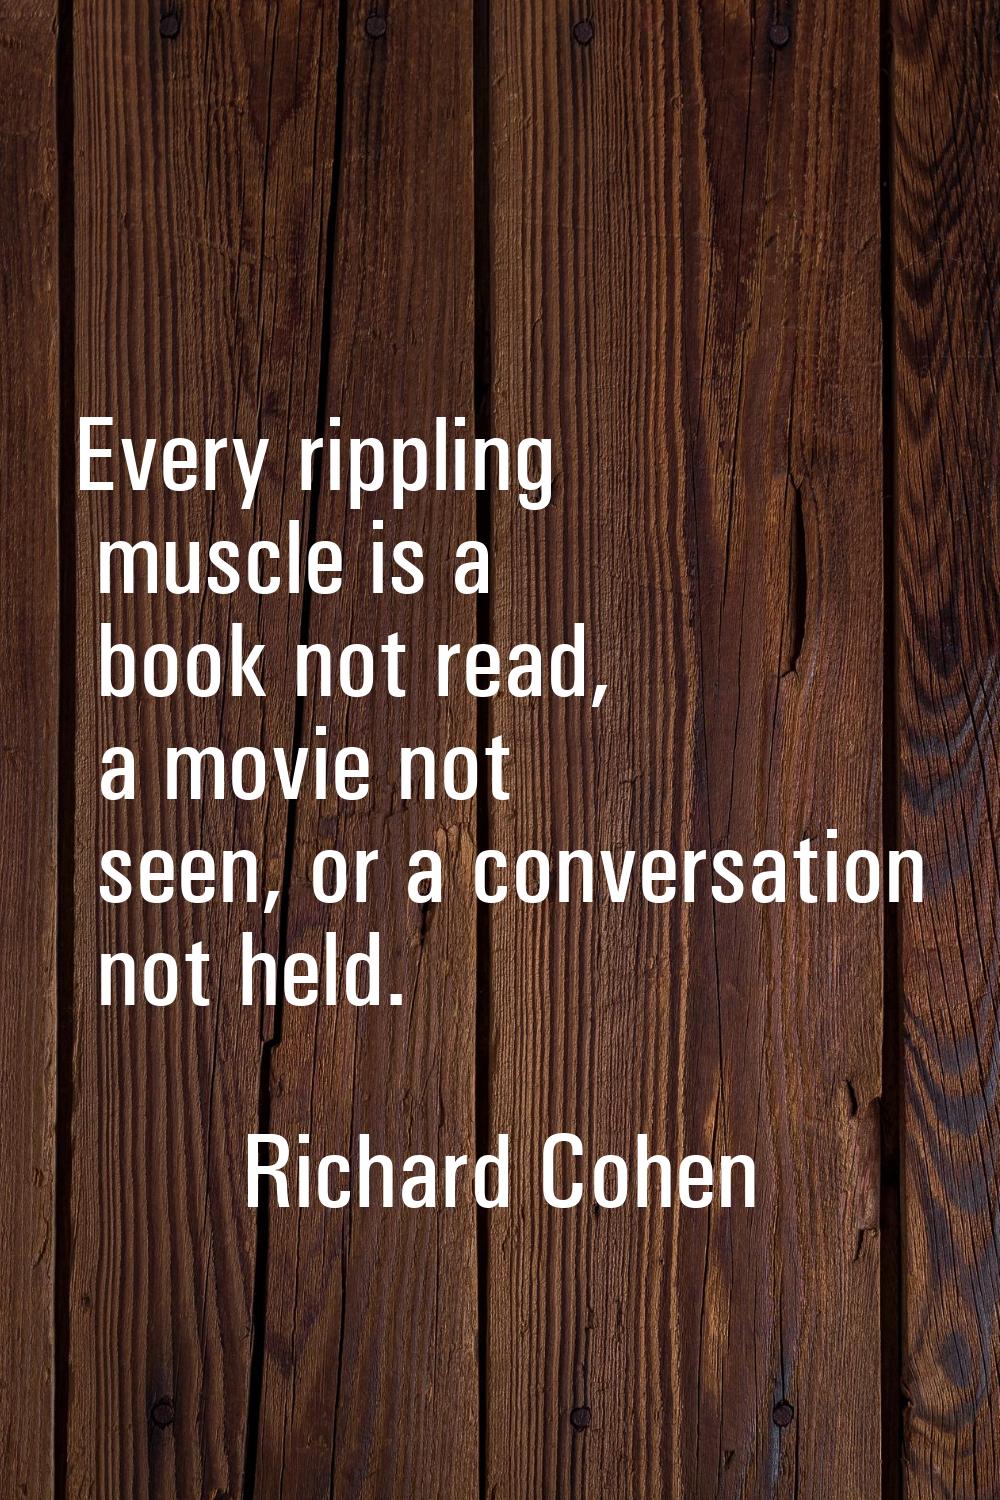 Every rippling muscle is a book not read, a movie not seen, or a conversation not held.